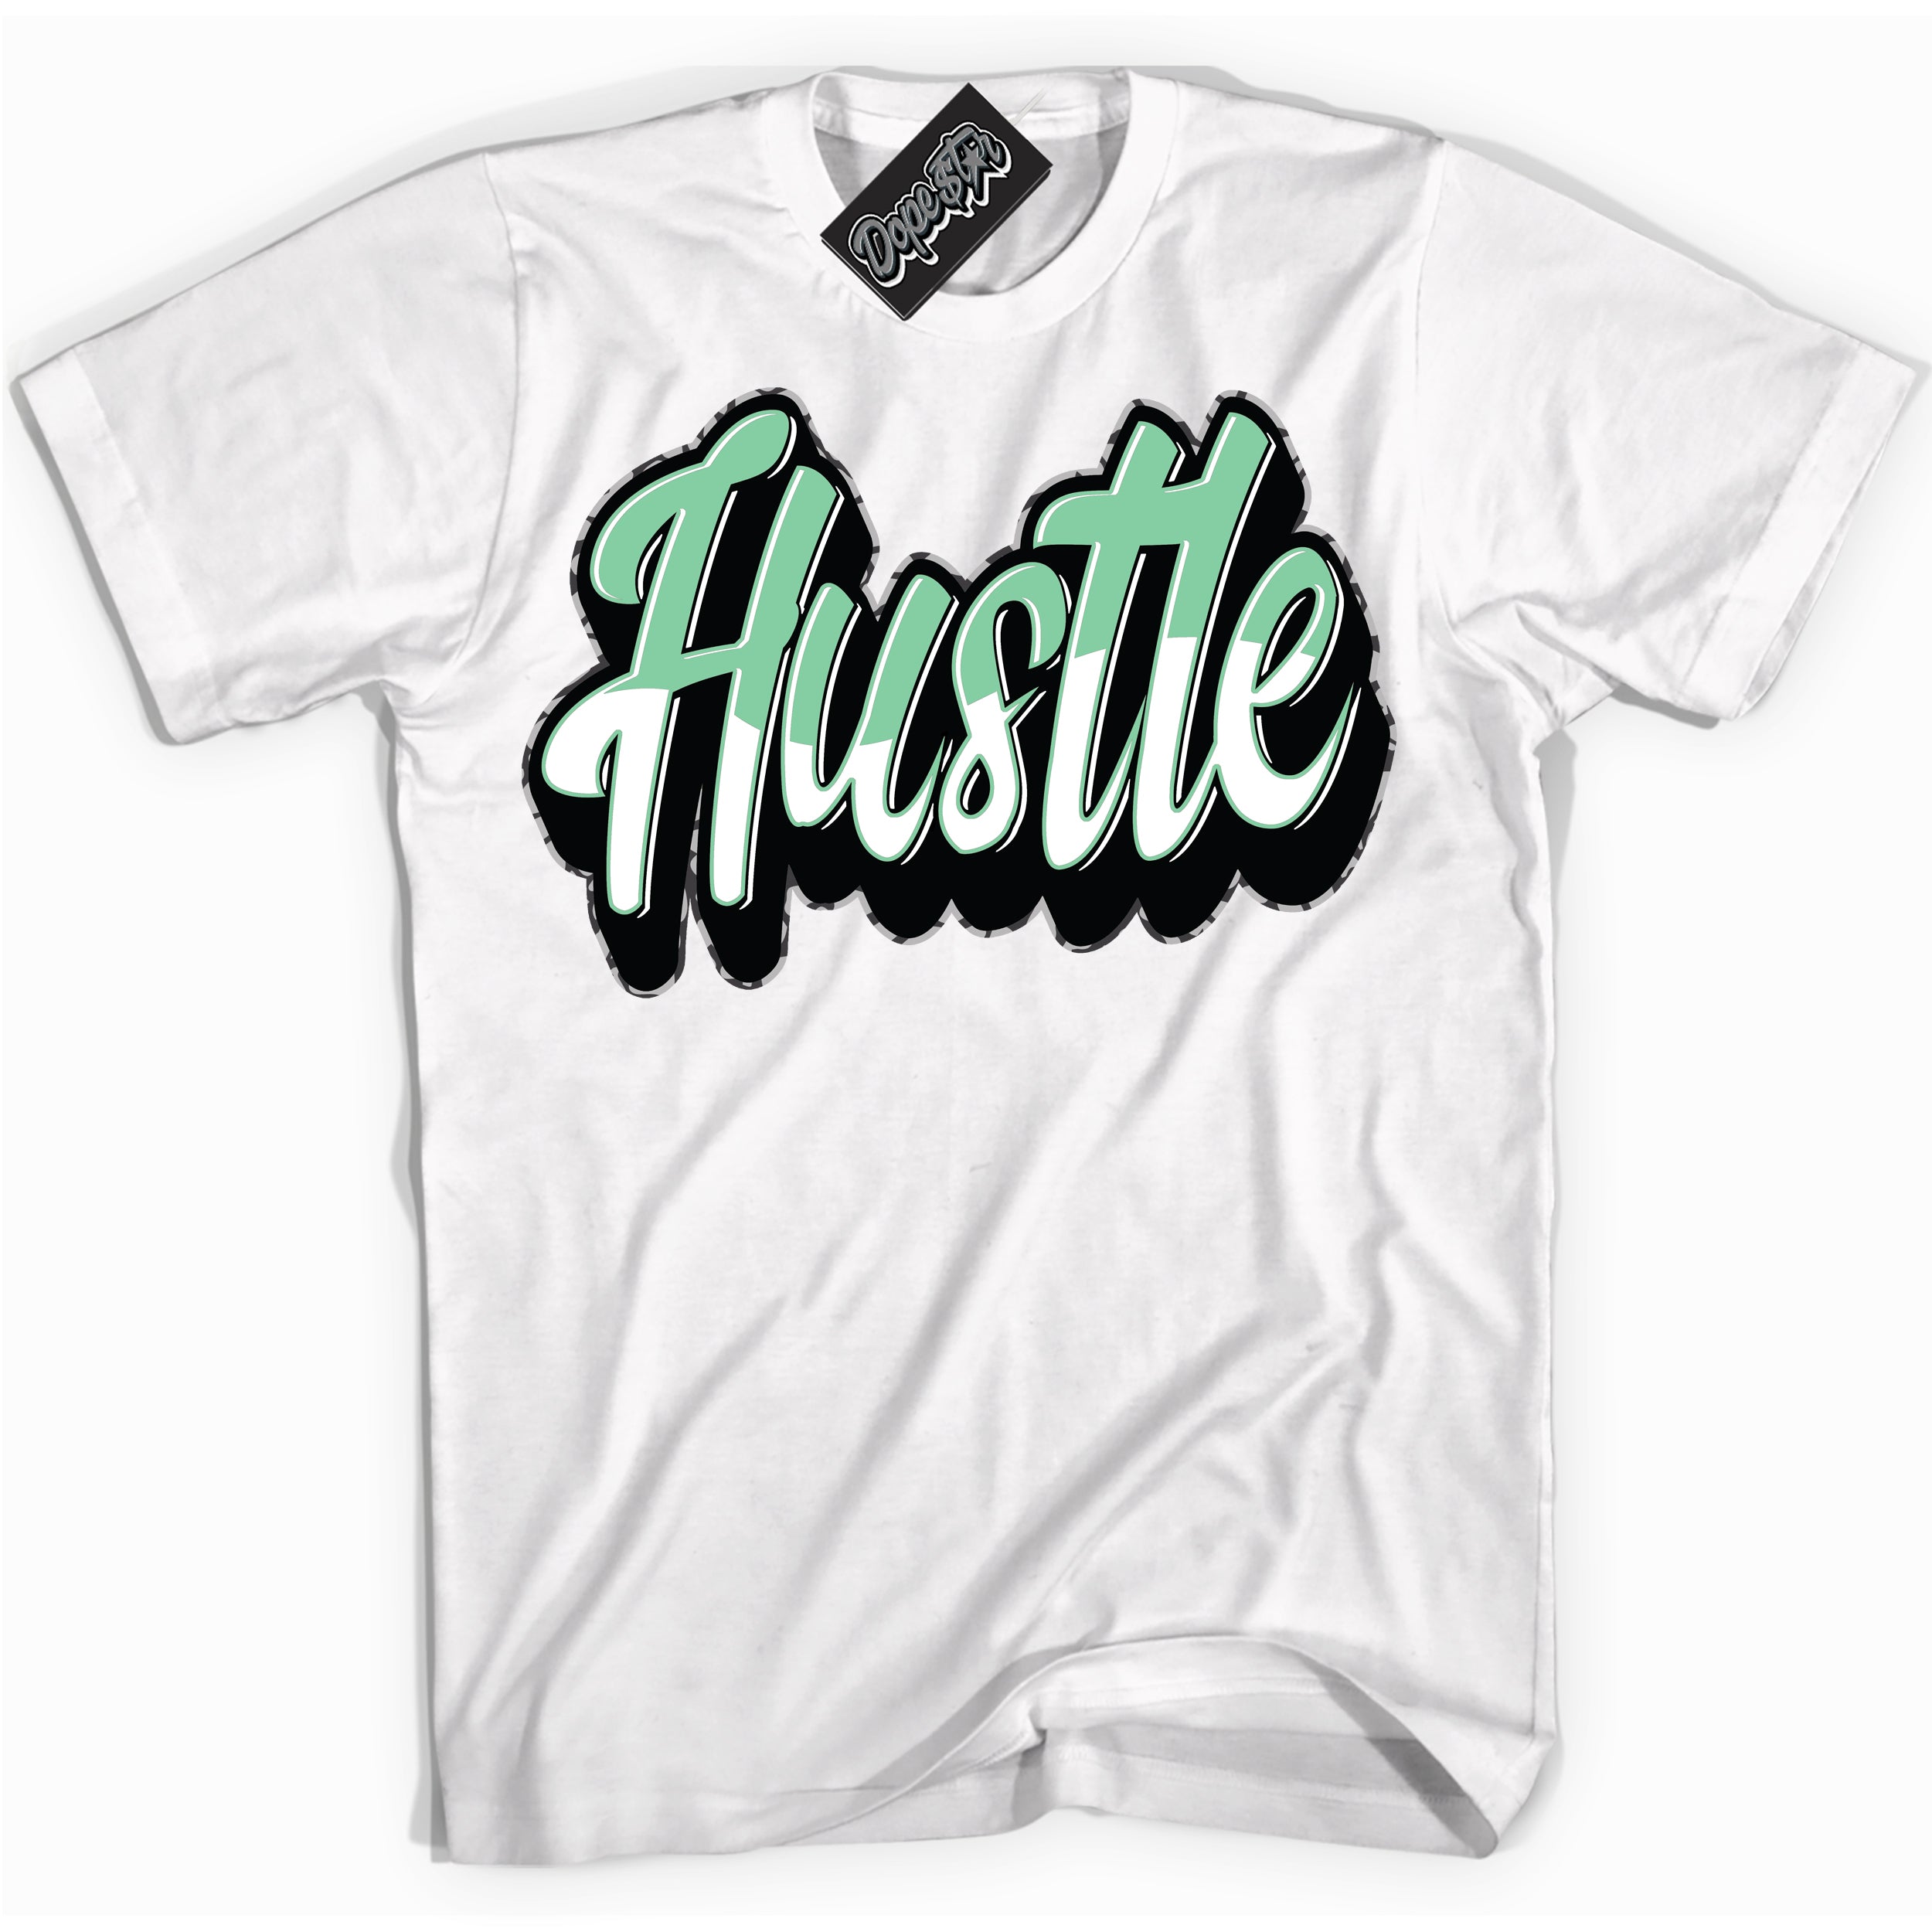 Cool White graphic tee with “ Hustle 2 ” design, that perfectly matches Green Glow 3s sneakers 